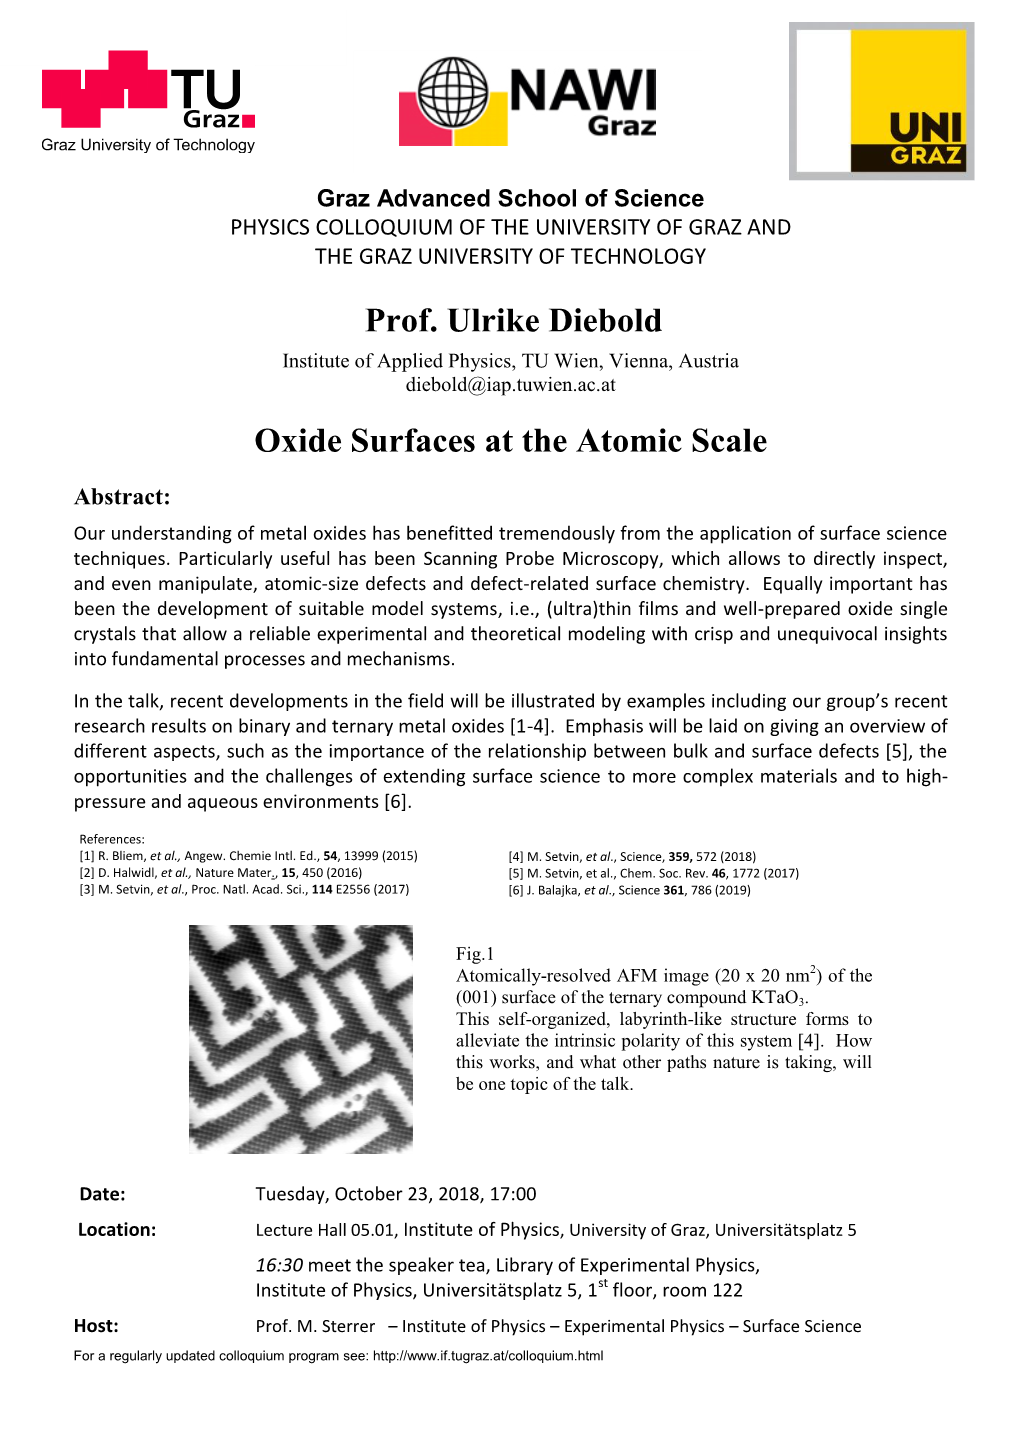 Prof. Ulrike Diebold Oxide Surfaces at the Atomic Scale